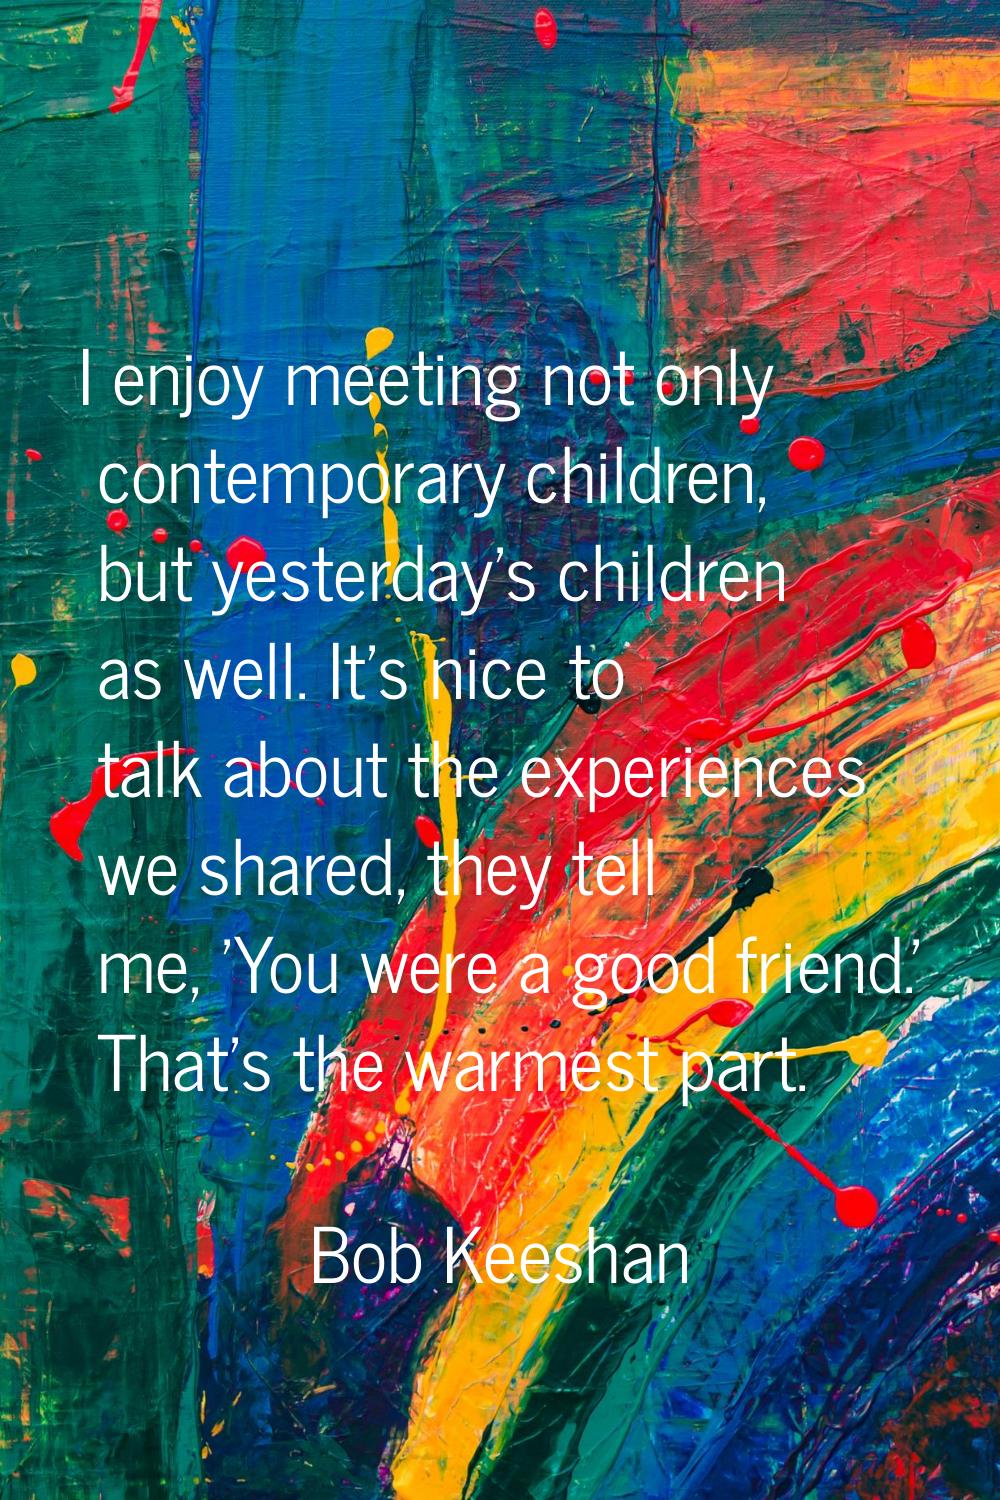 I enjoy meeting not only contemporary children, but yesterday's children as well. It's nice to talk